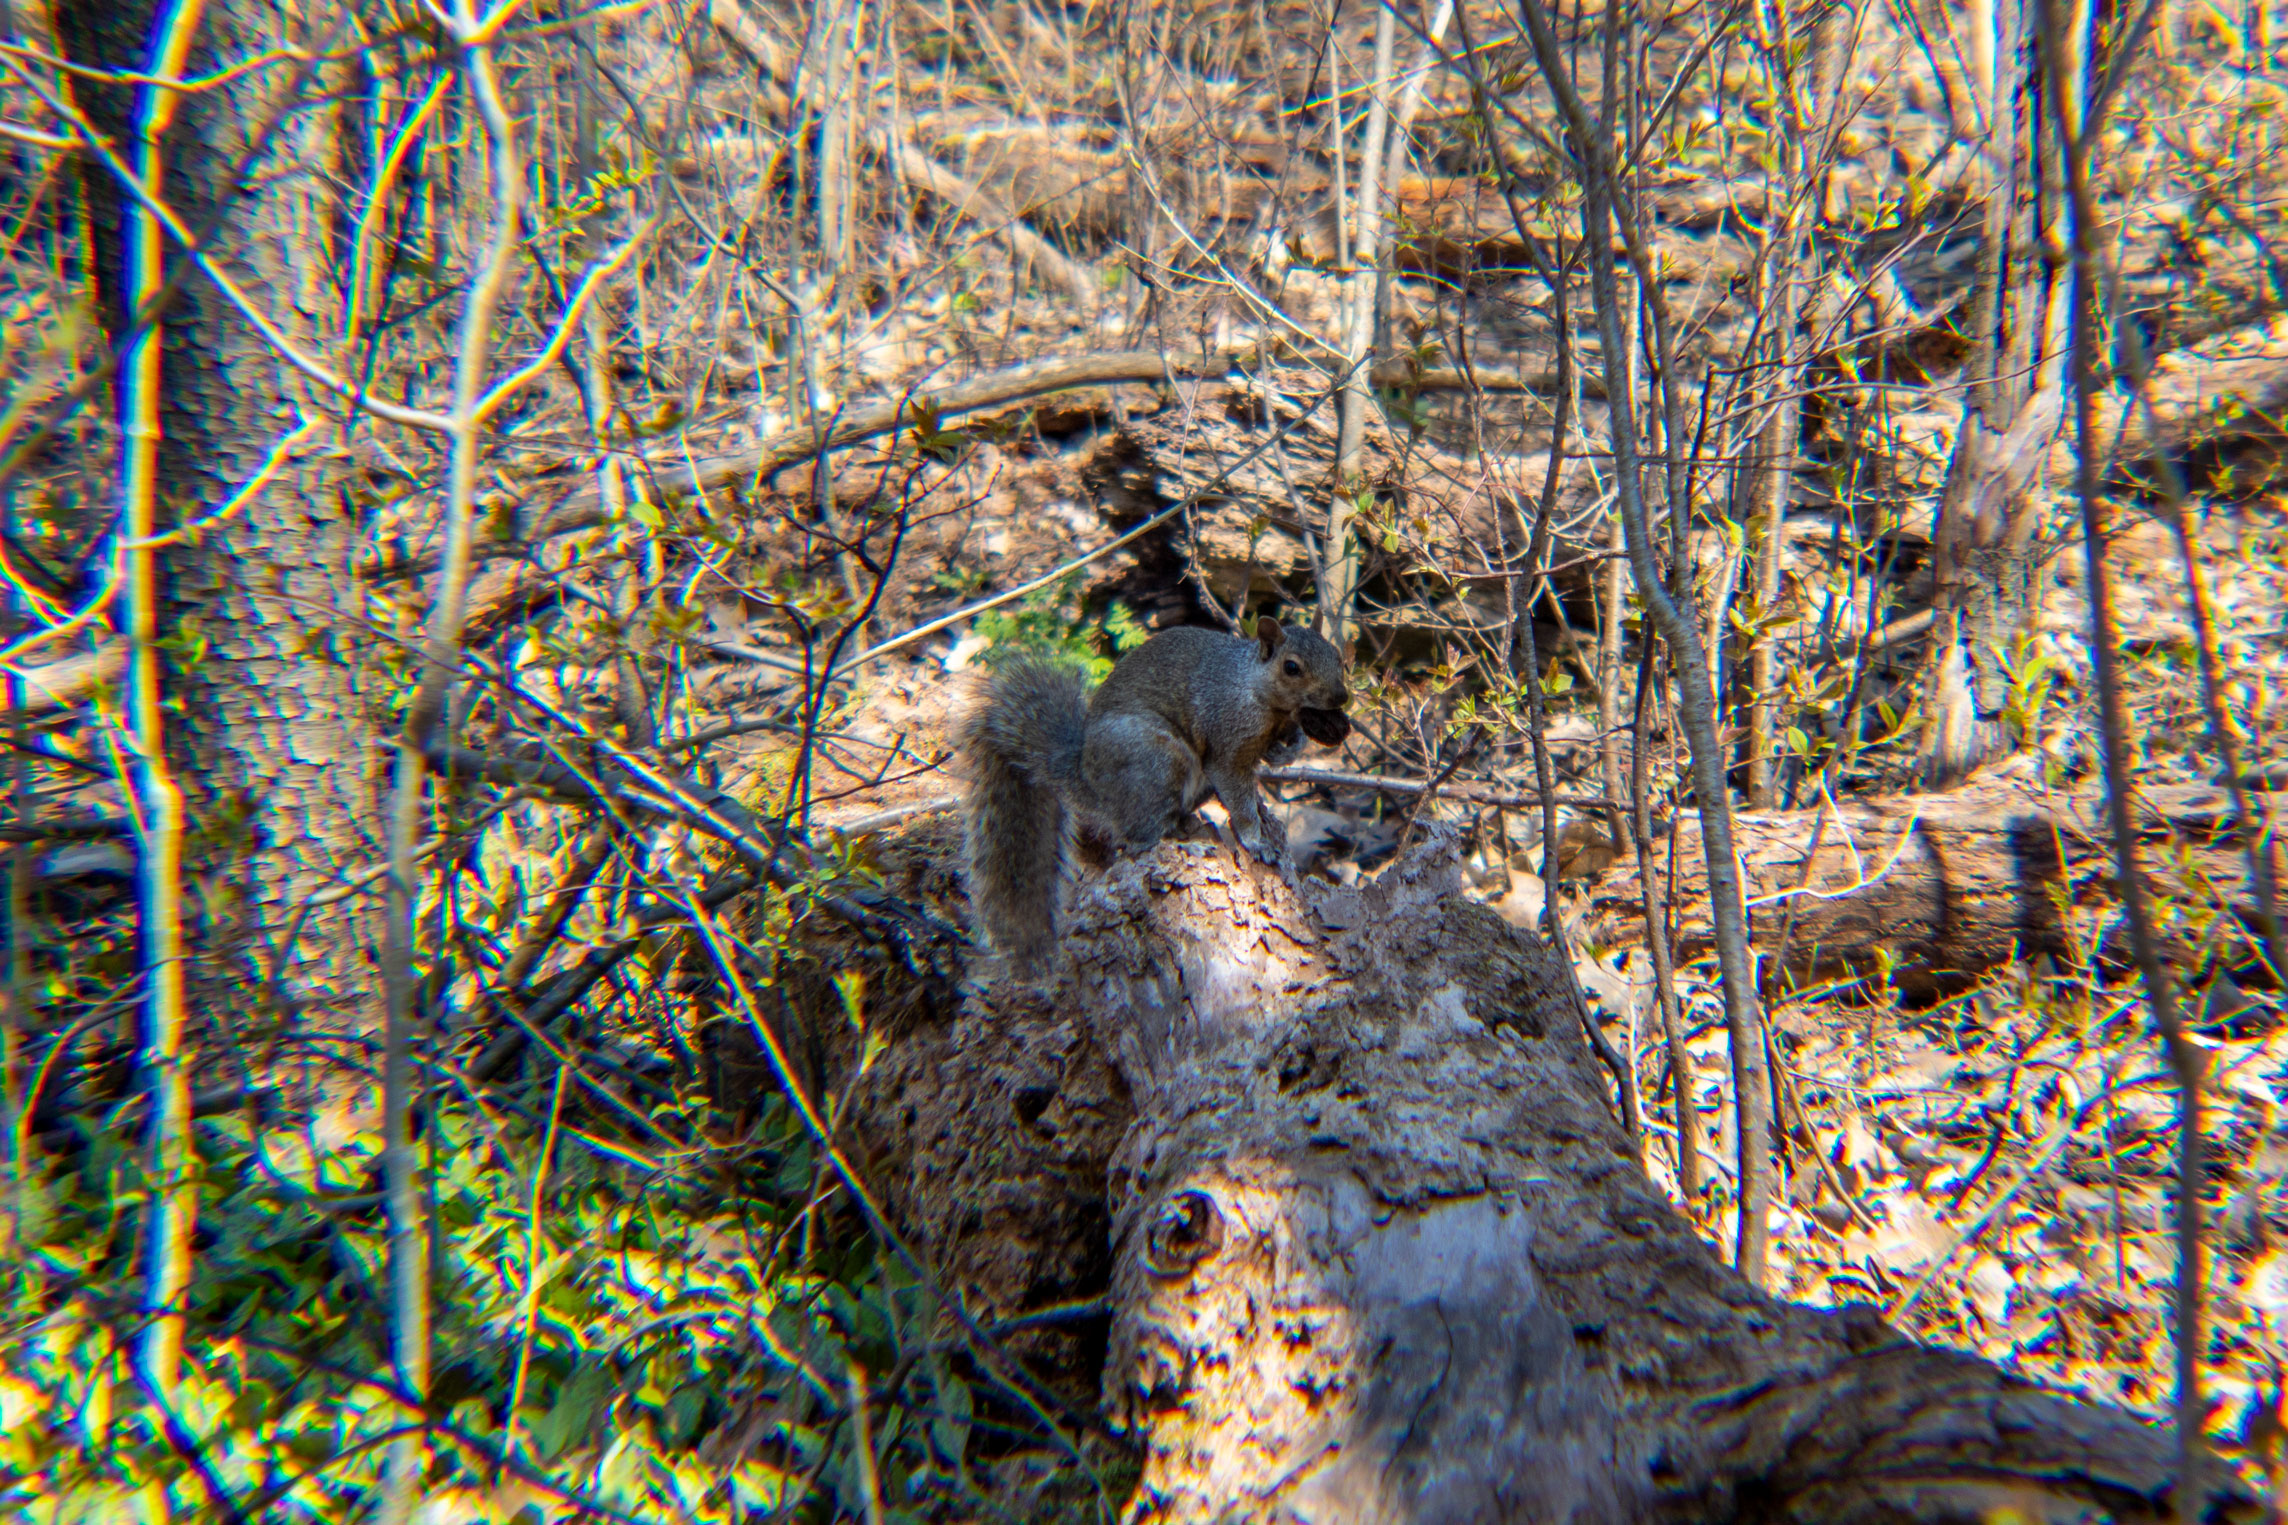 Squirrel sitting on a log in the woods holding a nut